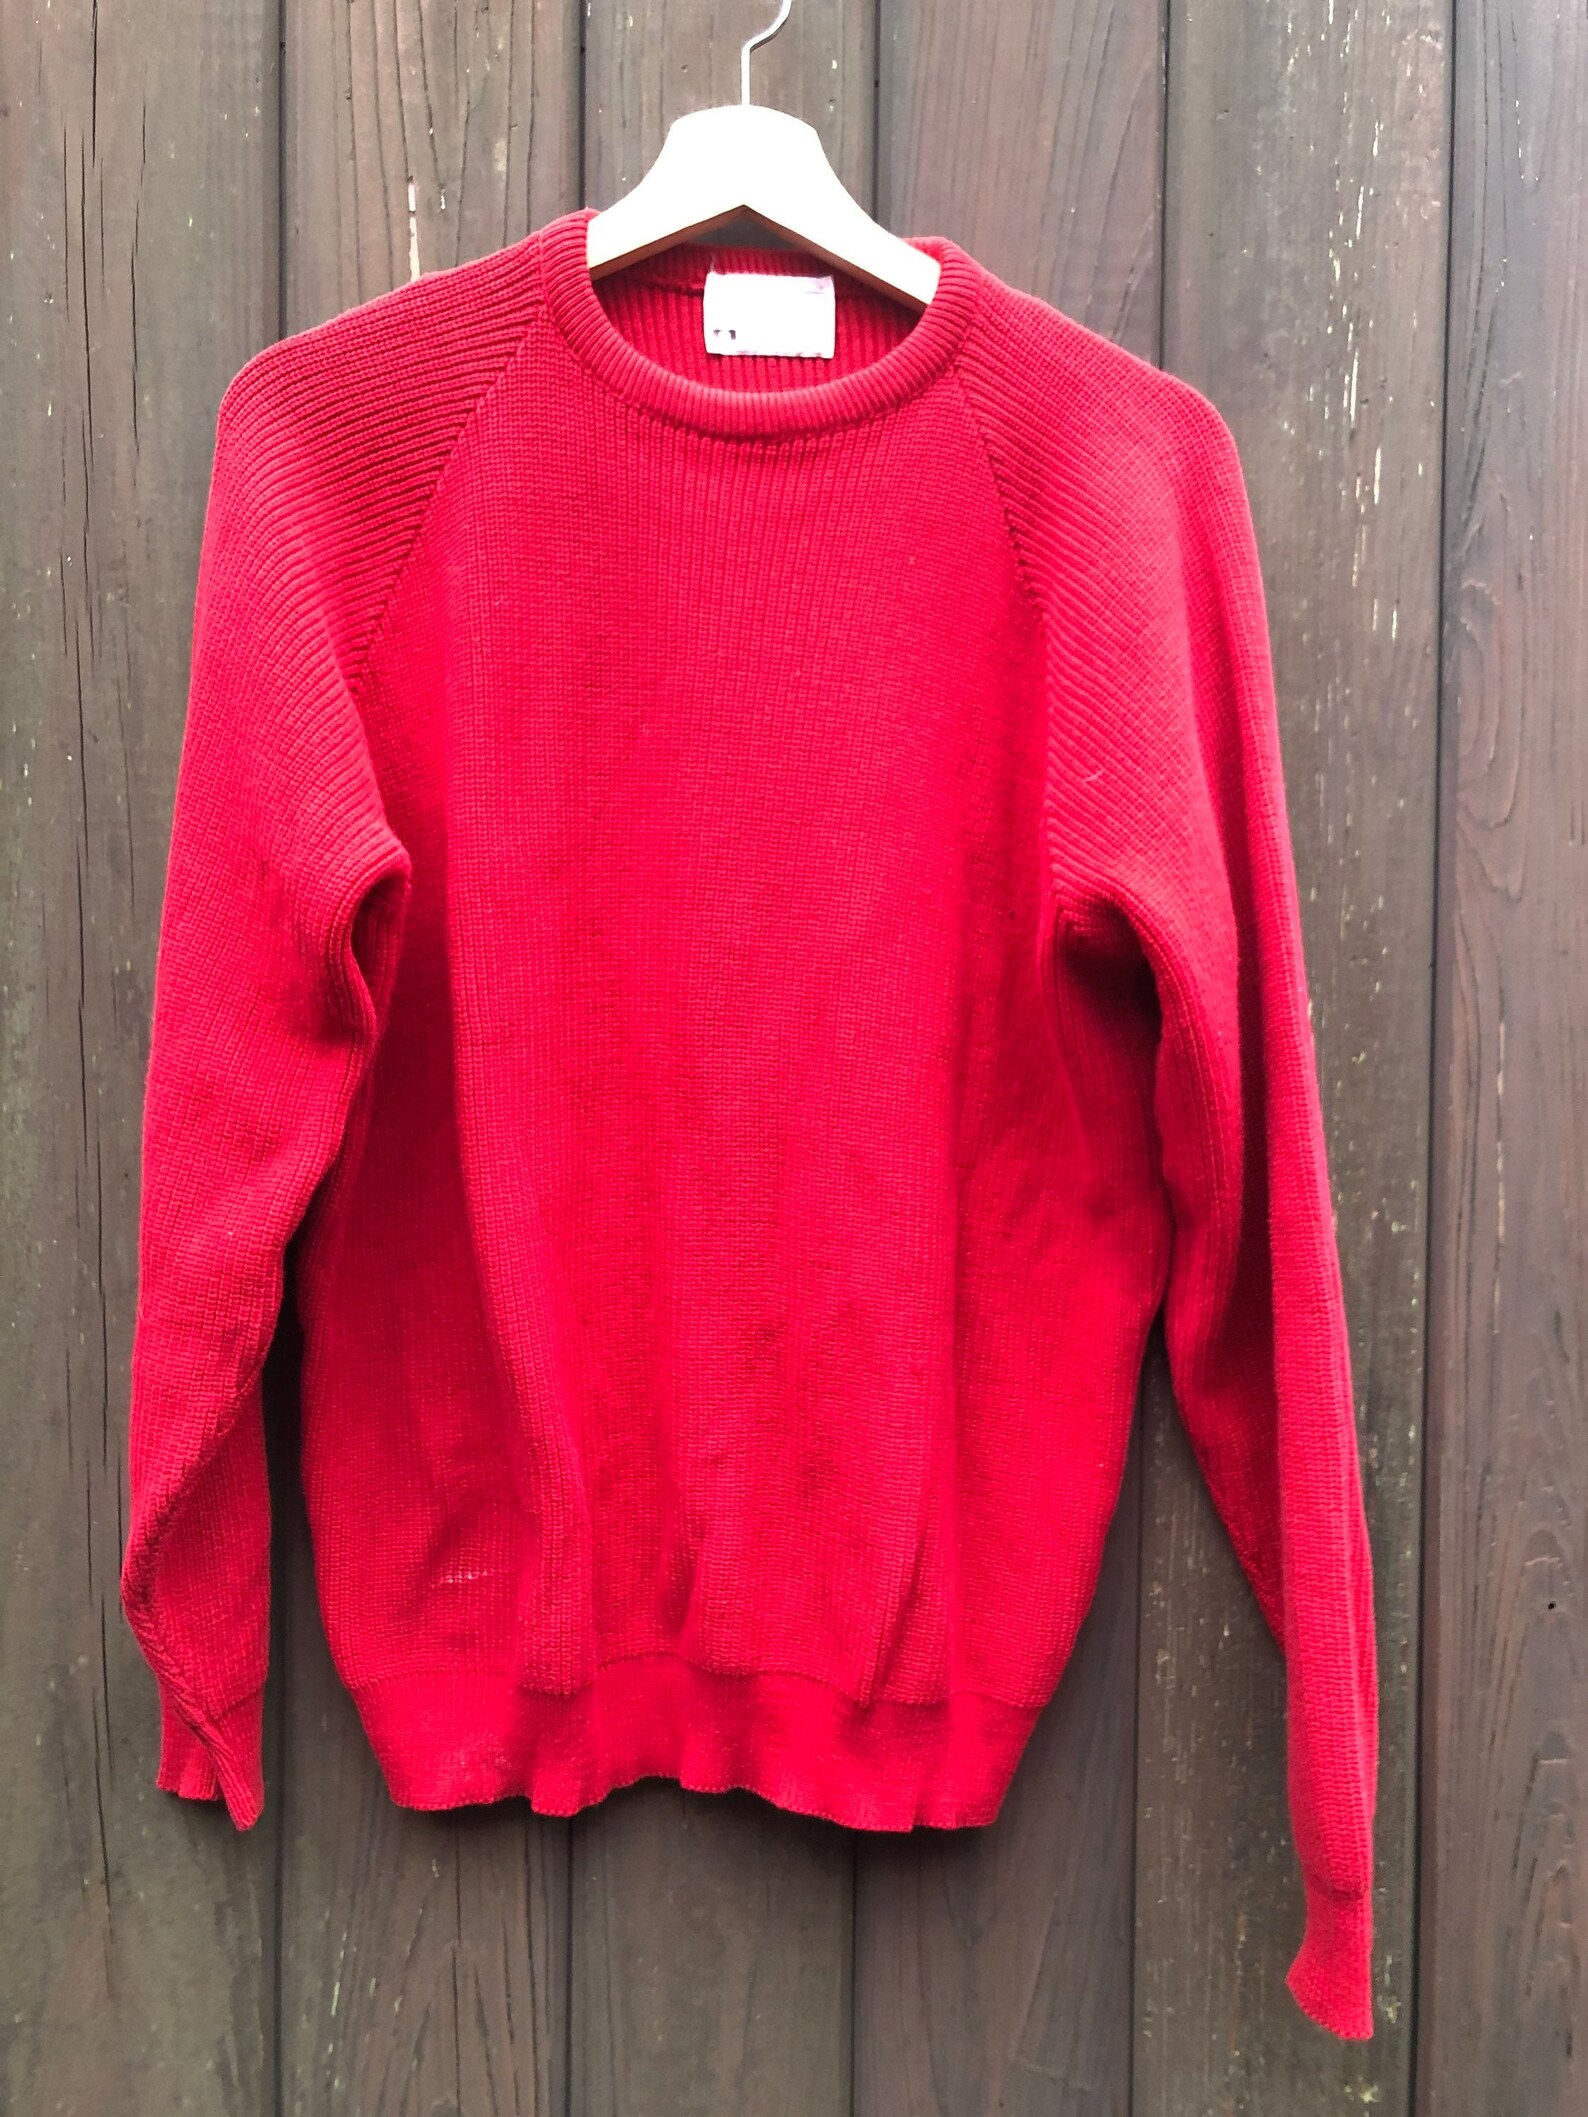 Vintage 80s 100% cotton red shaker knit sweater. Size L/XL | Etsy